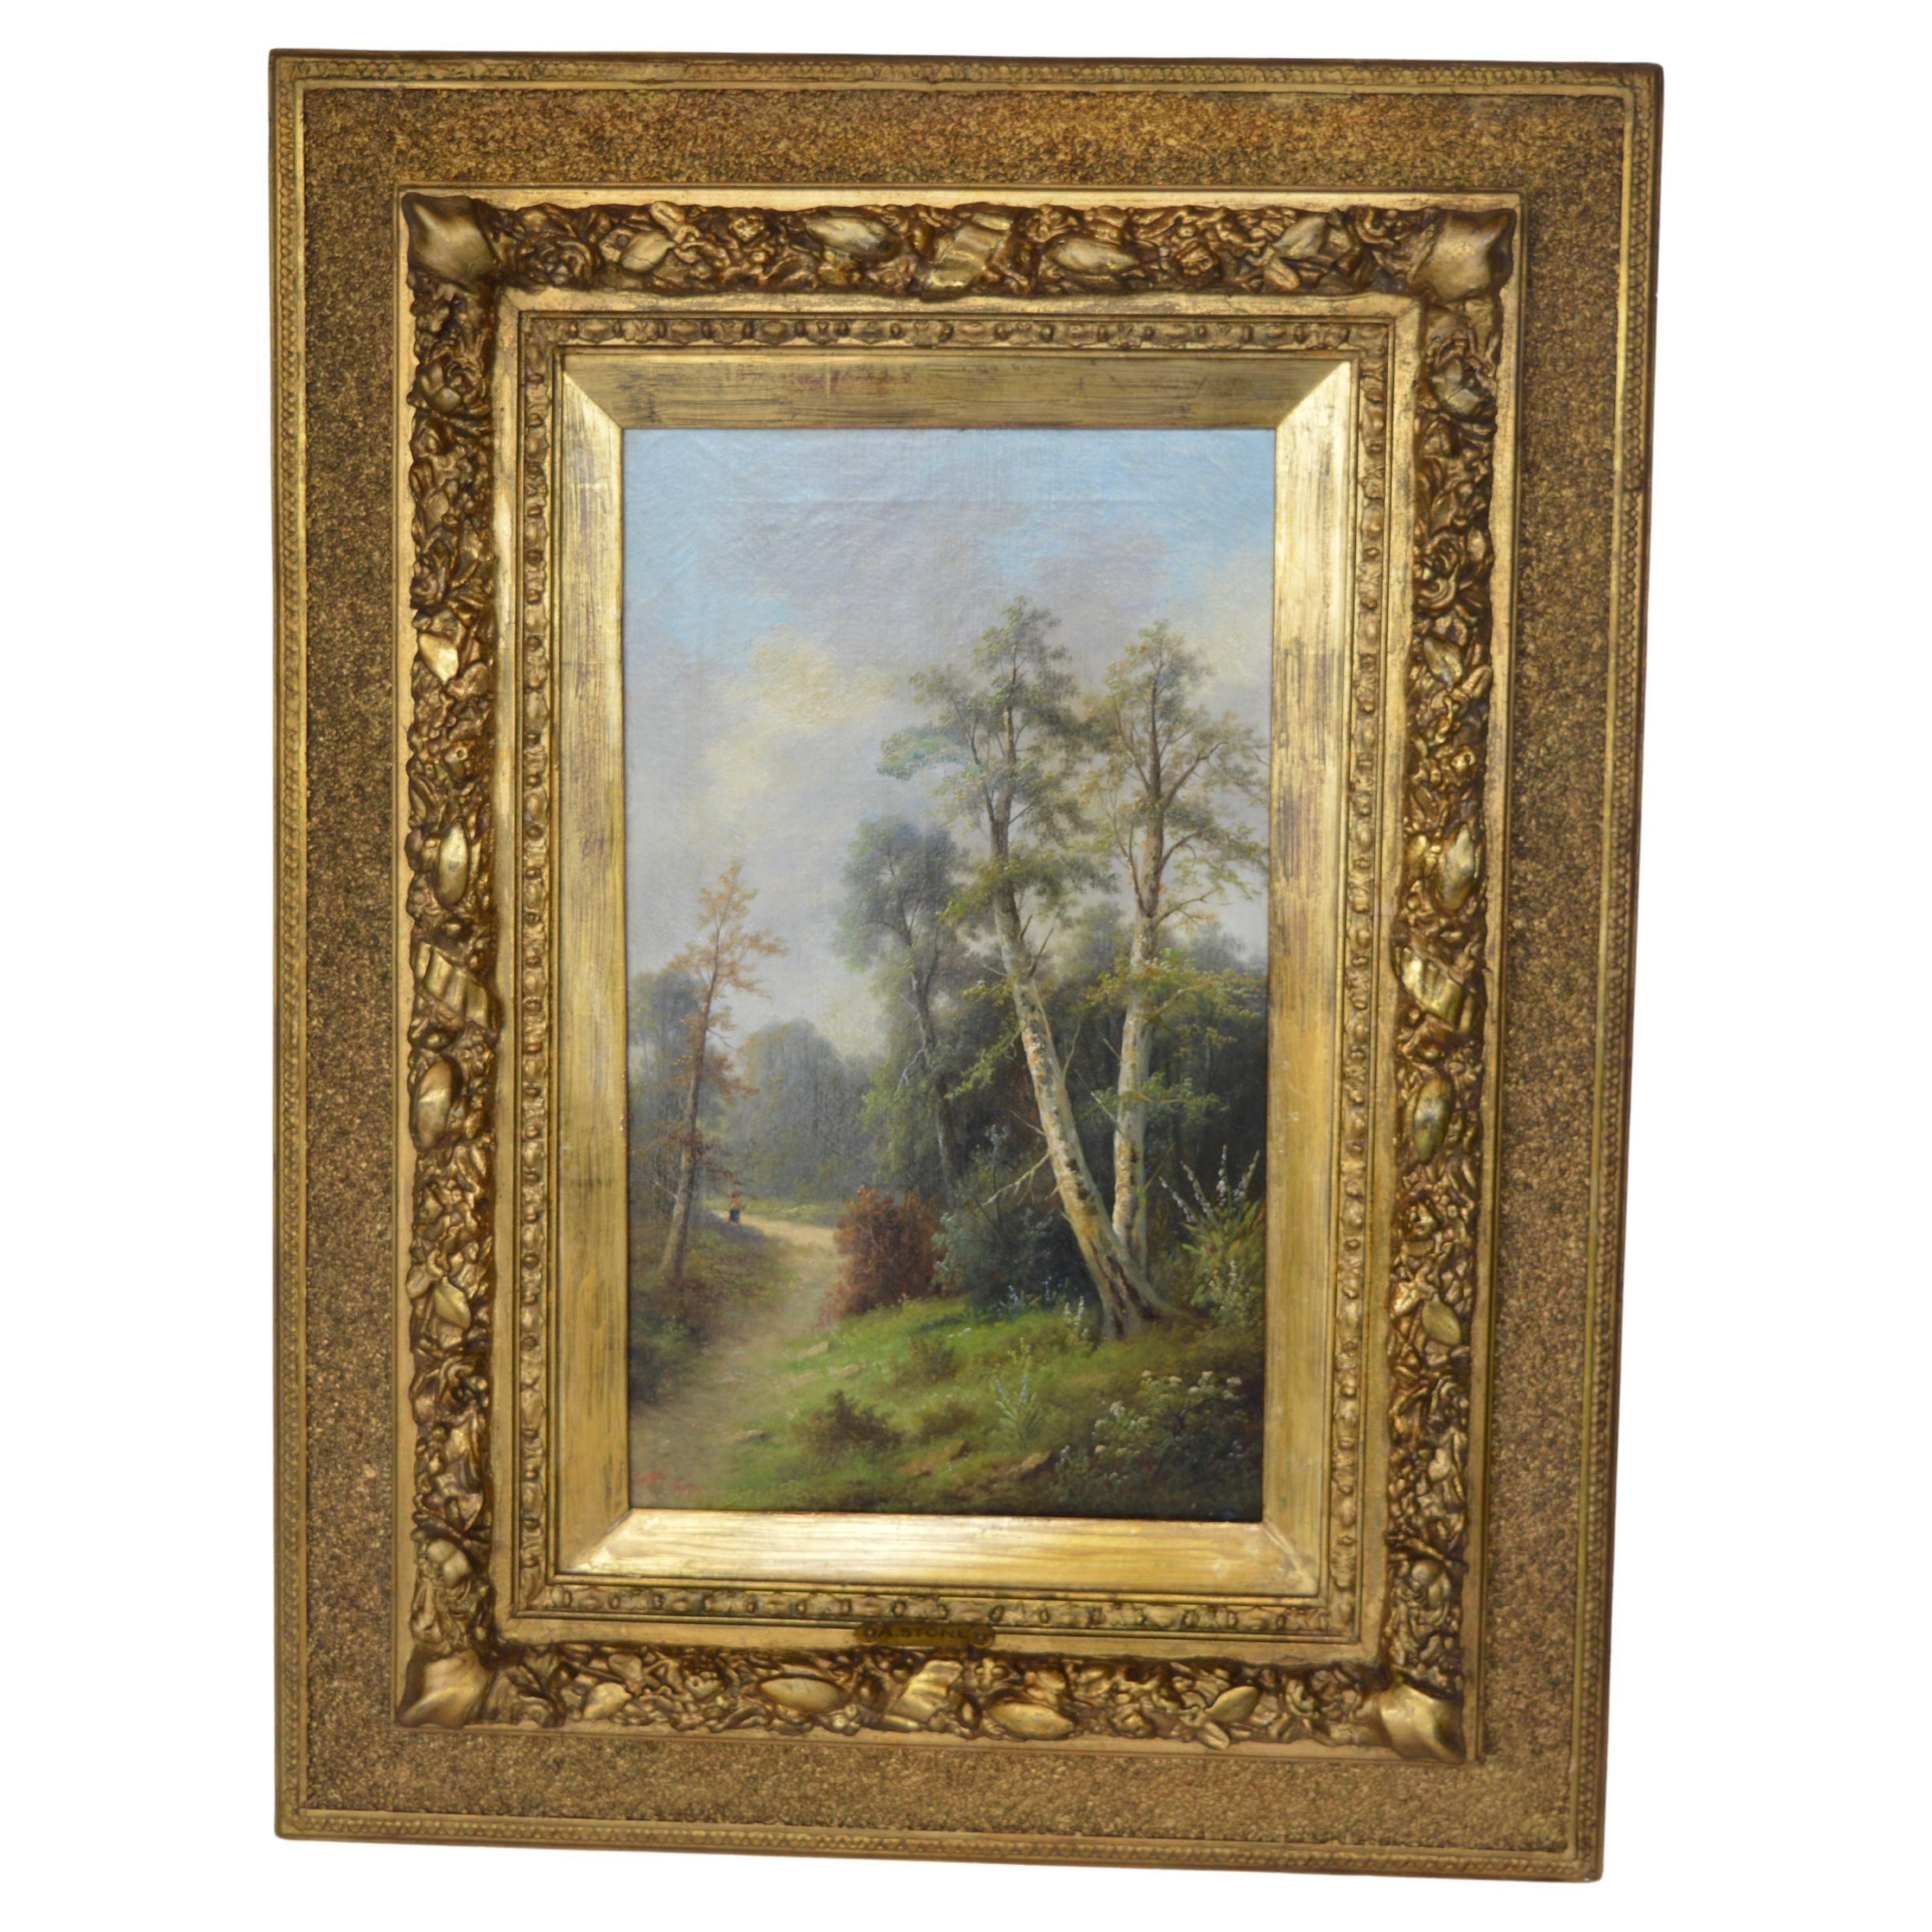 Signed Ada Stone (1879-1904) Diptych oil on canvas. Known for landscape and equestrian screen painting.
Measurements with Frame: 32 ½ H x 24 ½ W x 2 ½ D
Measurements without Frame: 20